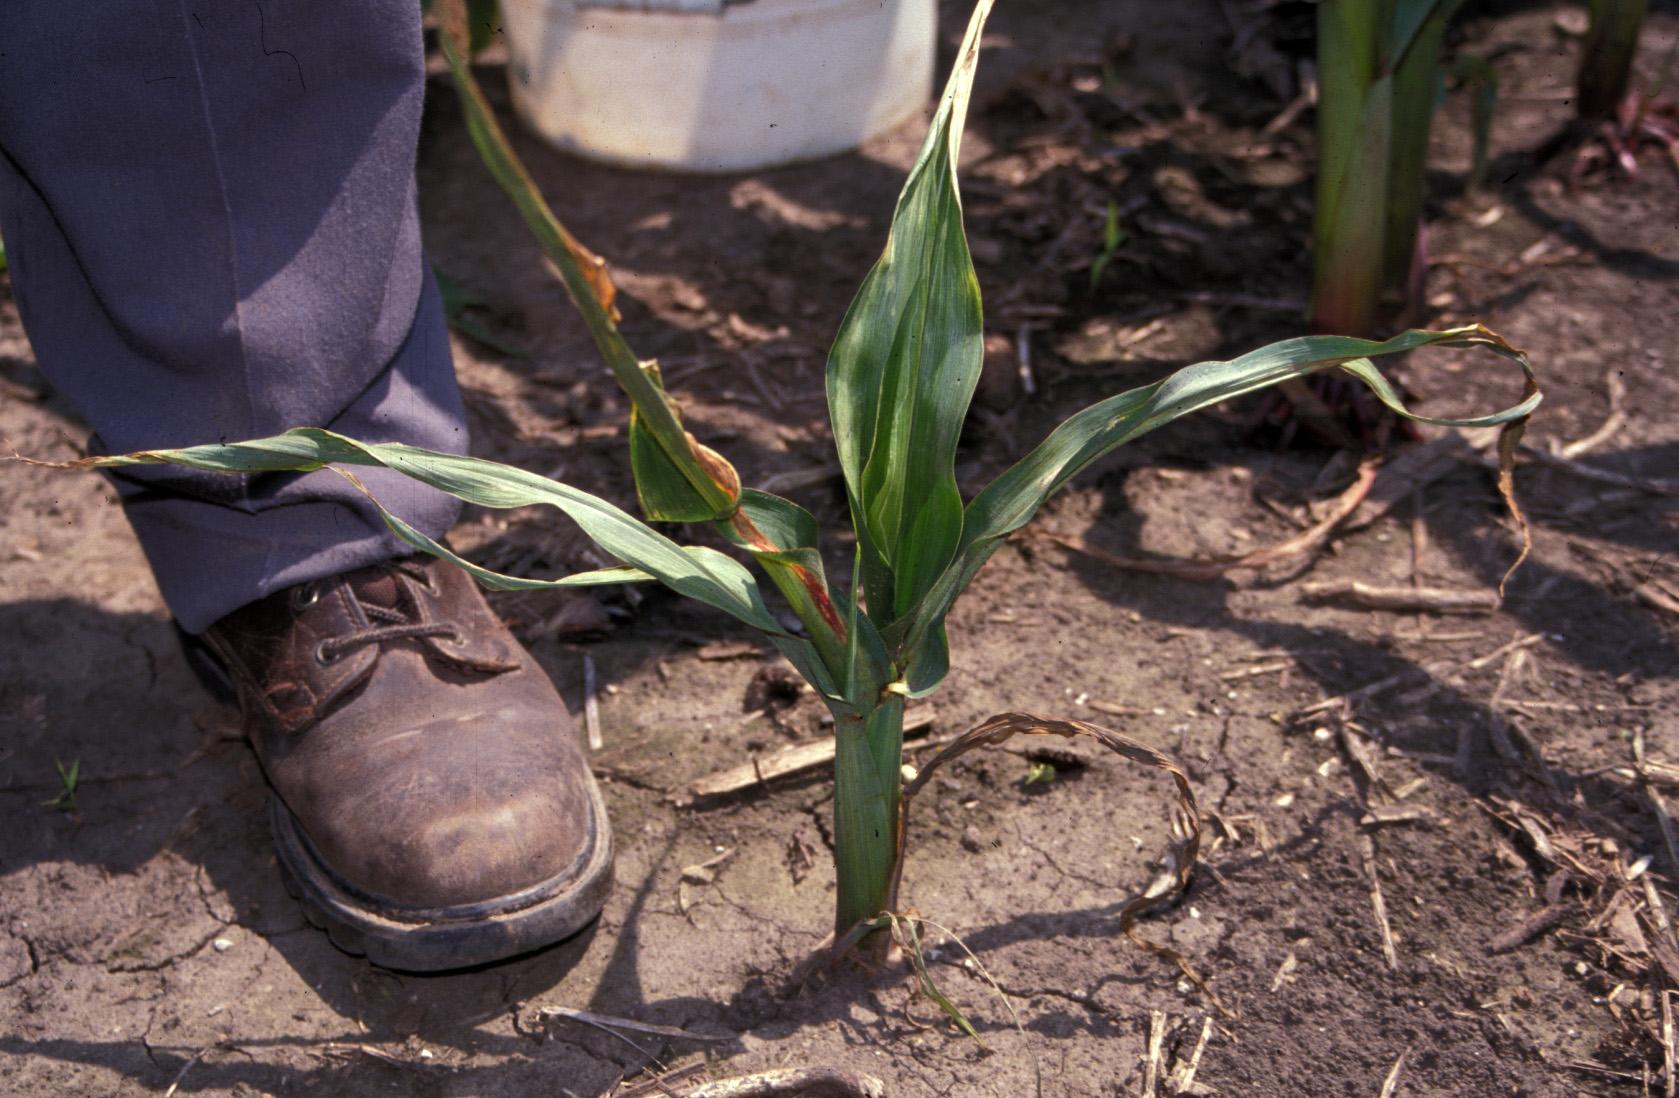 Boot next to corn plant infected with Stewart's disease